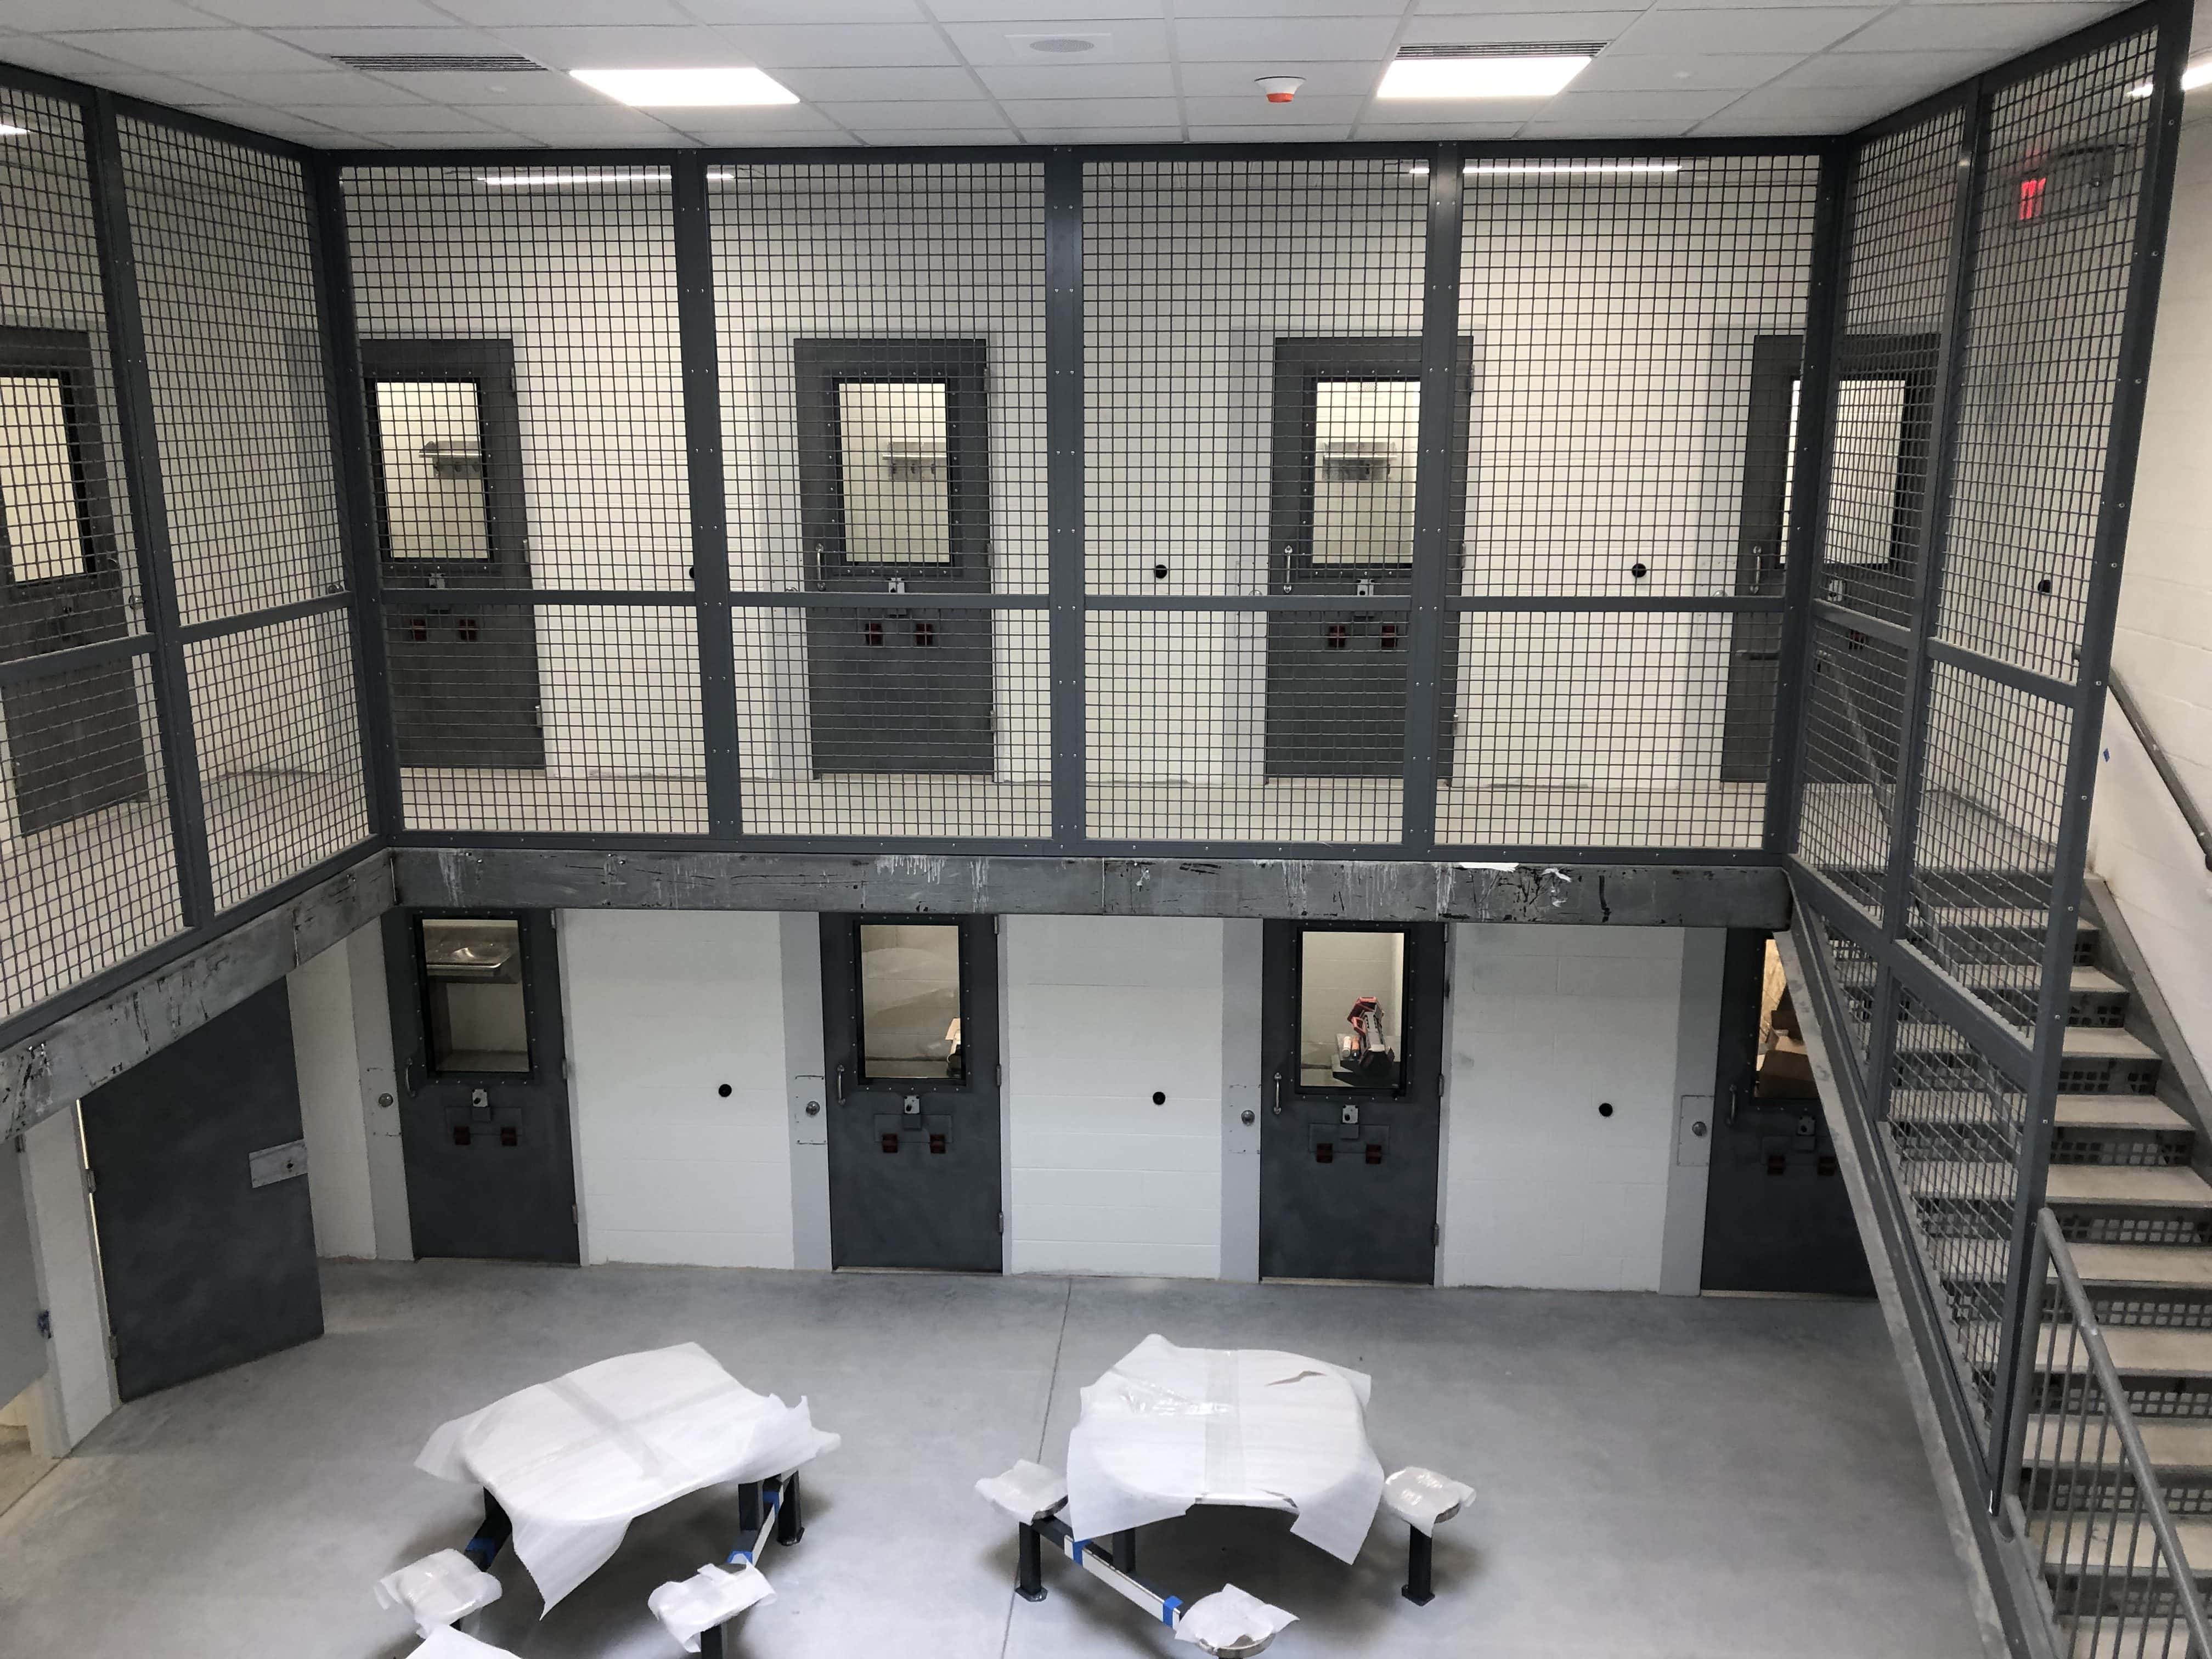 Here's a look at Lee County's new jail facility | WALS